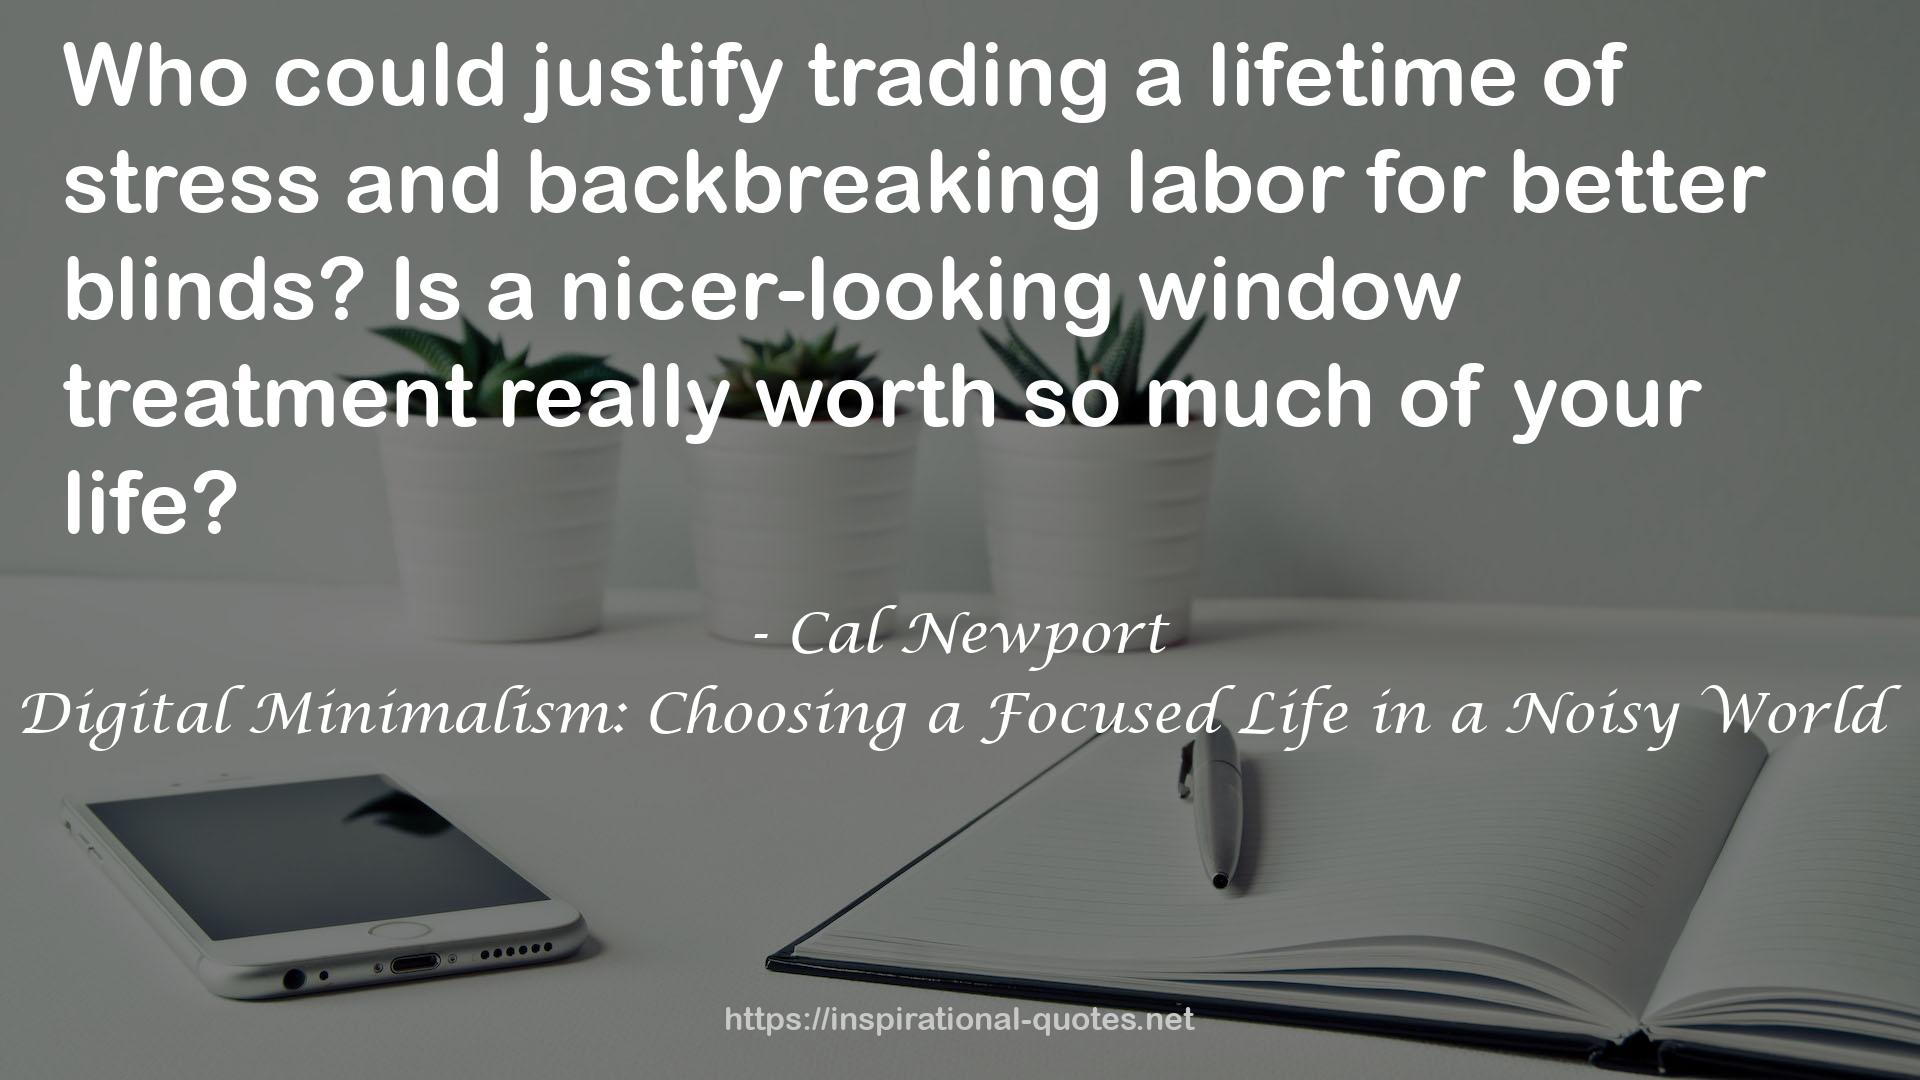 Digital Minimalism: Choosing a Focused Life in a Noisy World QUOTES